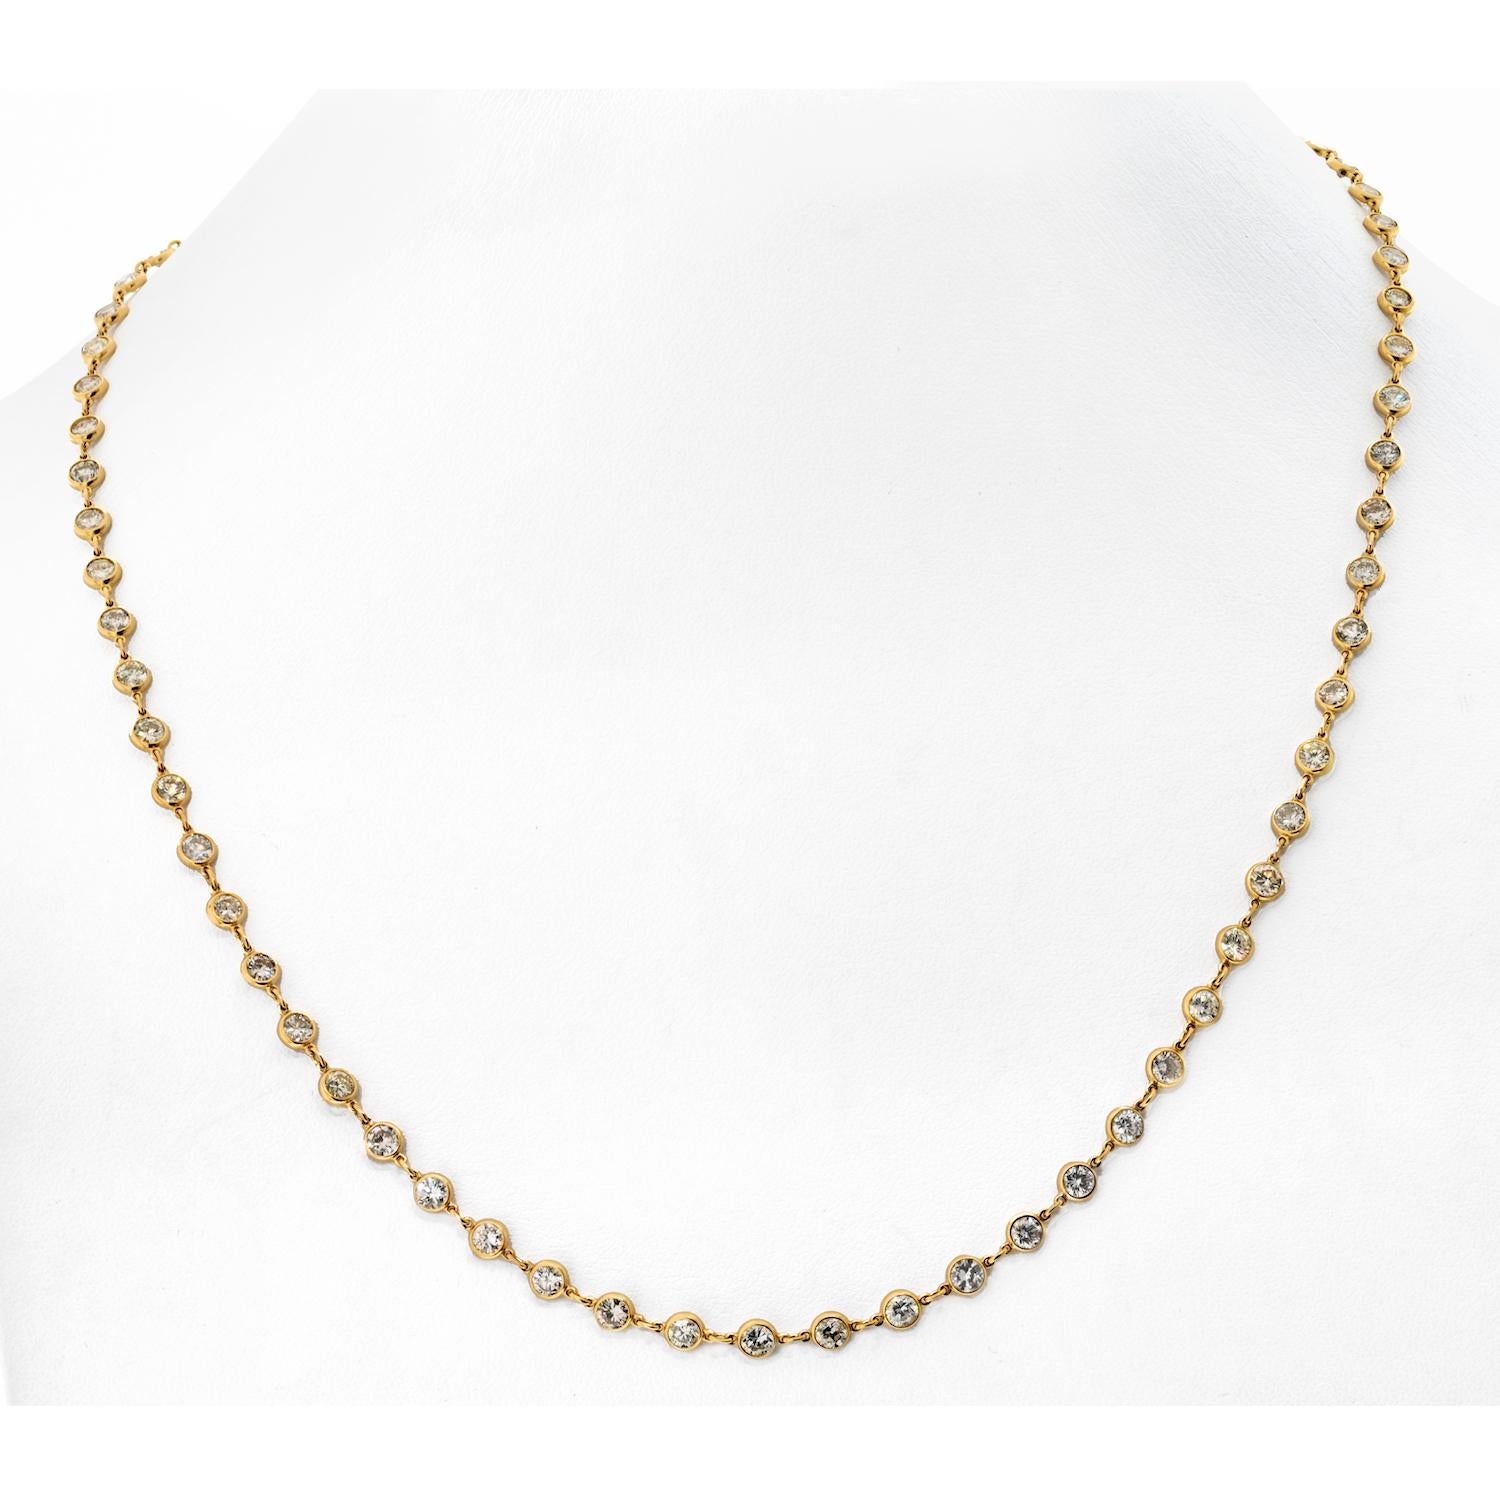 Introducing a truly enchanting piece of jewelry – the Beautiful Handmade Diamond by the Yard Necklace in 18K Yellow Gold. 

This exquisite necklace features a remarkable 11.68 carats of natural round brilliant-cut diamonds, each hand-set in radiant